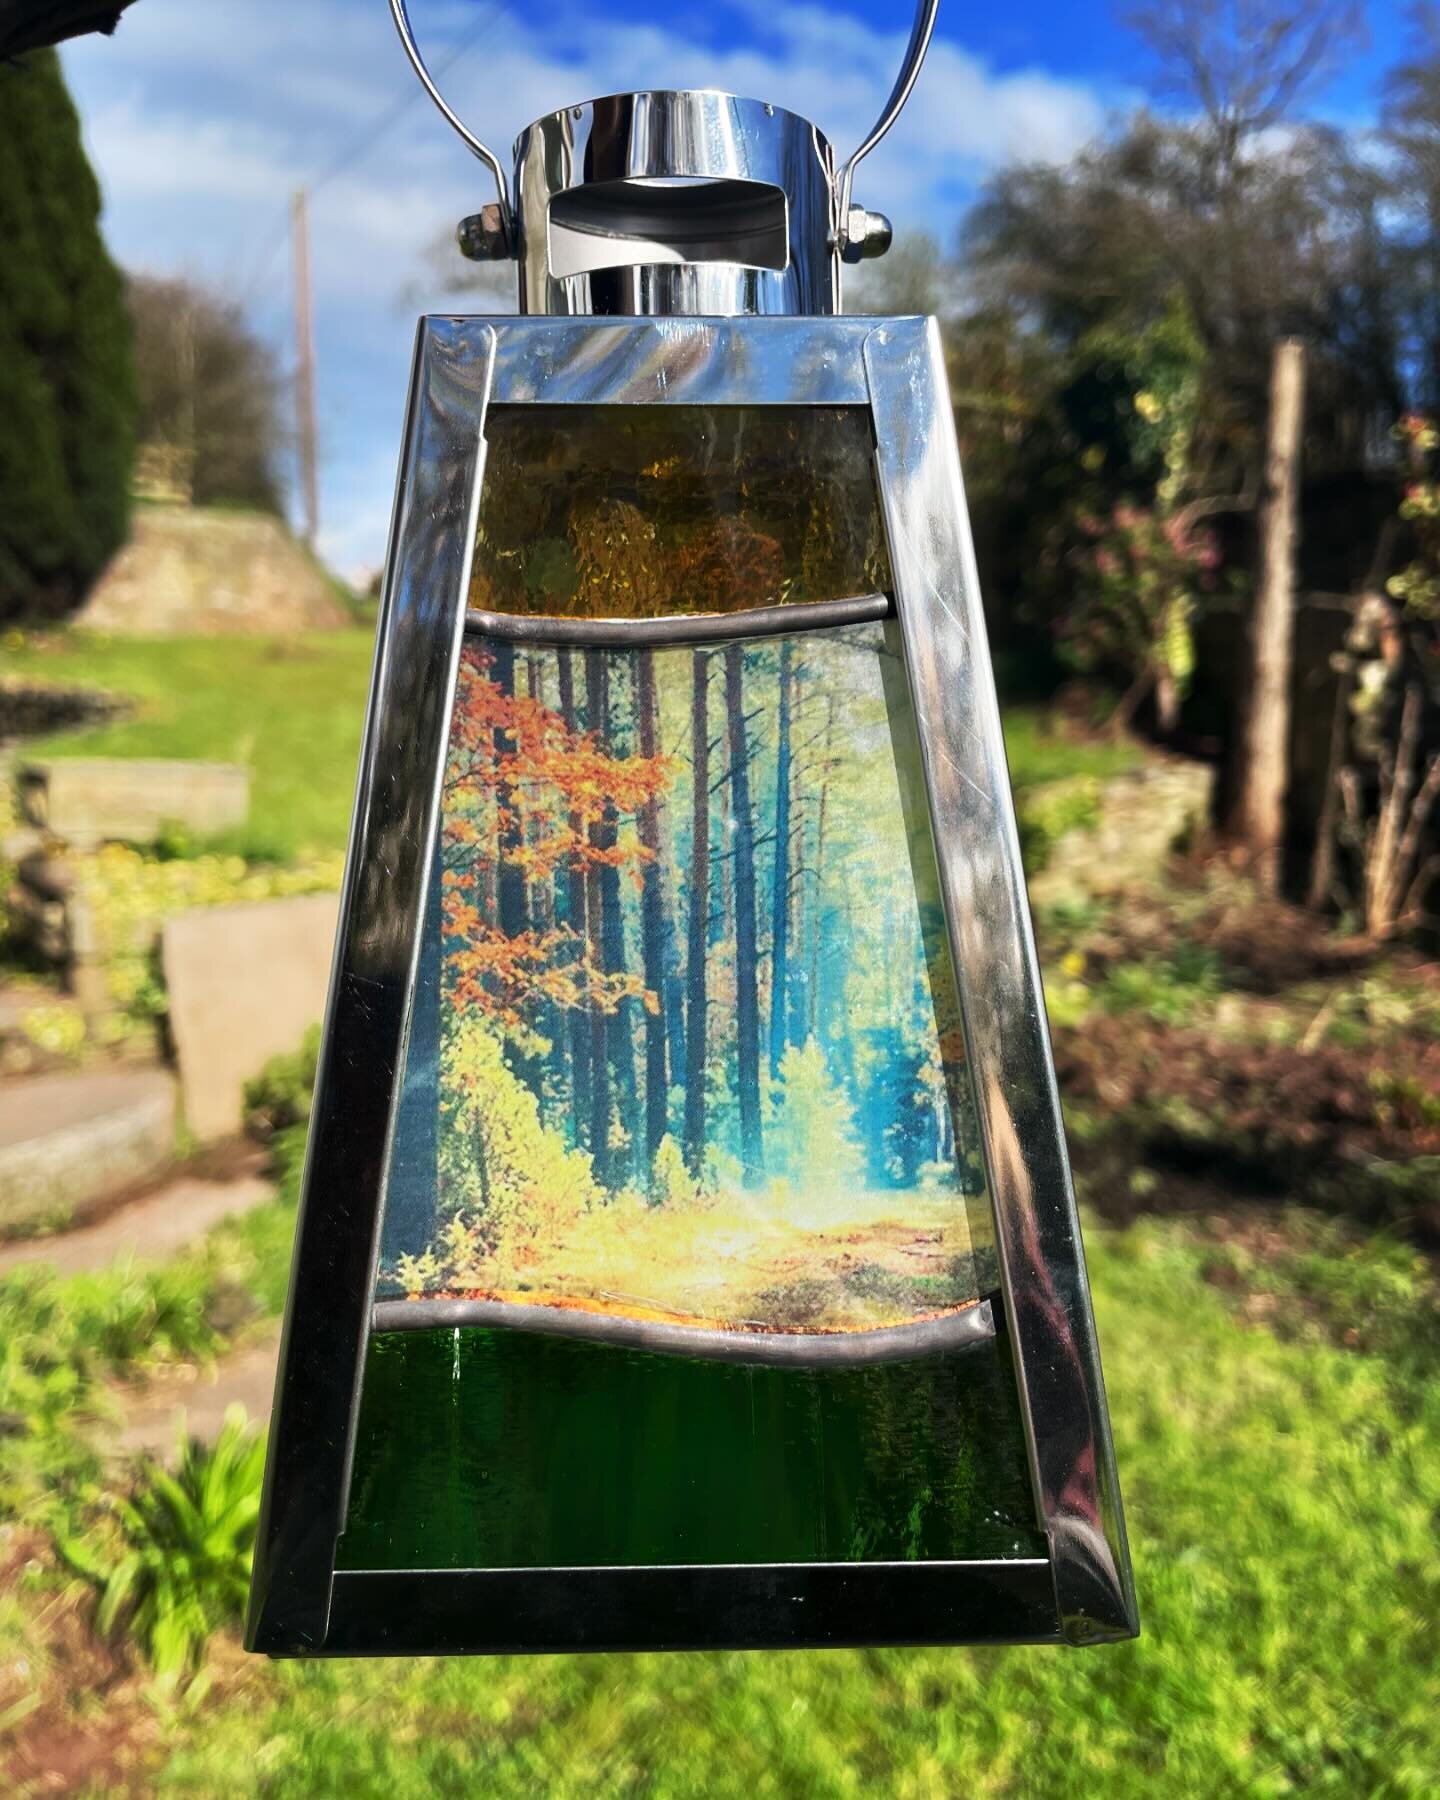 Happy sunny bank holiday everyone.  Hope your all enjoying the beautiful weather. 
Here in Wales 🏴󠁧󠁢󠁷󠁬󠁳󠁿 it&rsquo;s glorious, which is unusual for a bank holiday, it normally rains ☔️. 

So I thought I would share a new lantern with you. This 